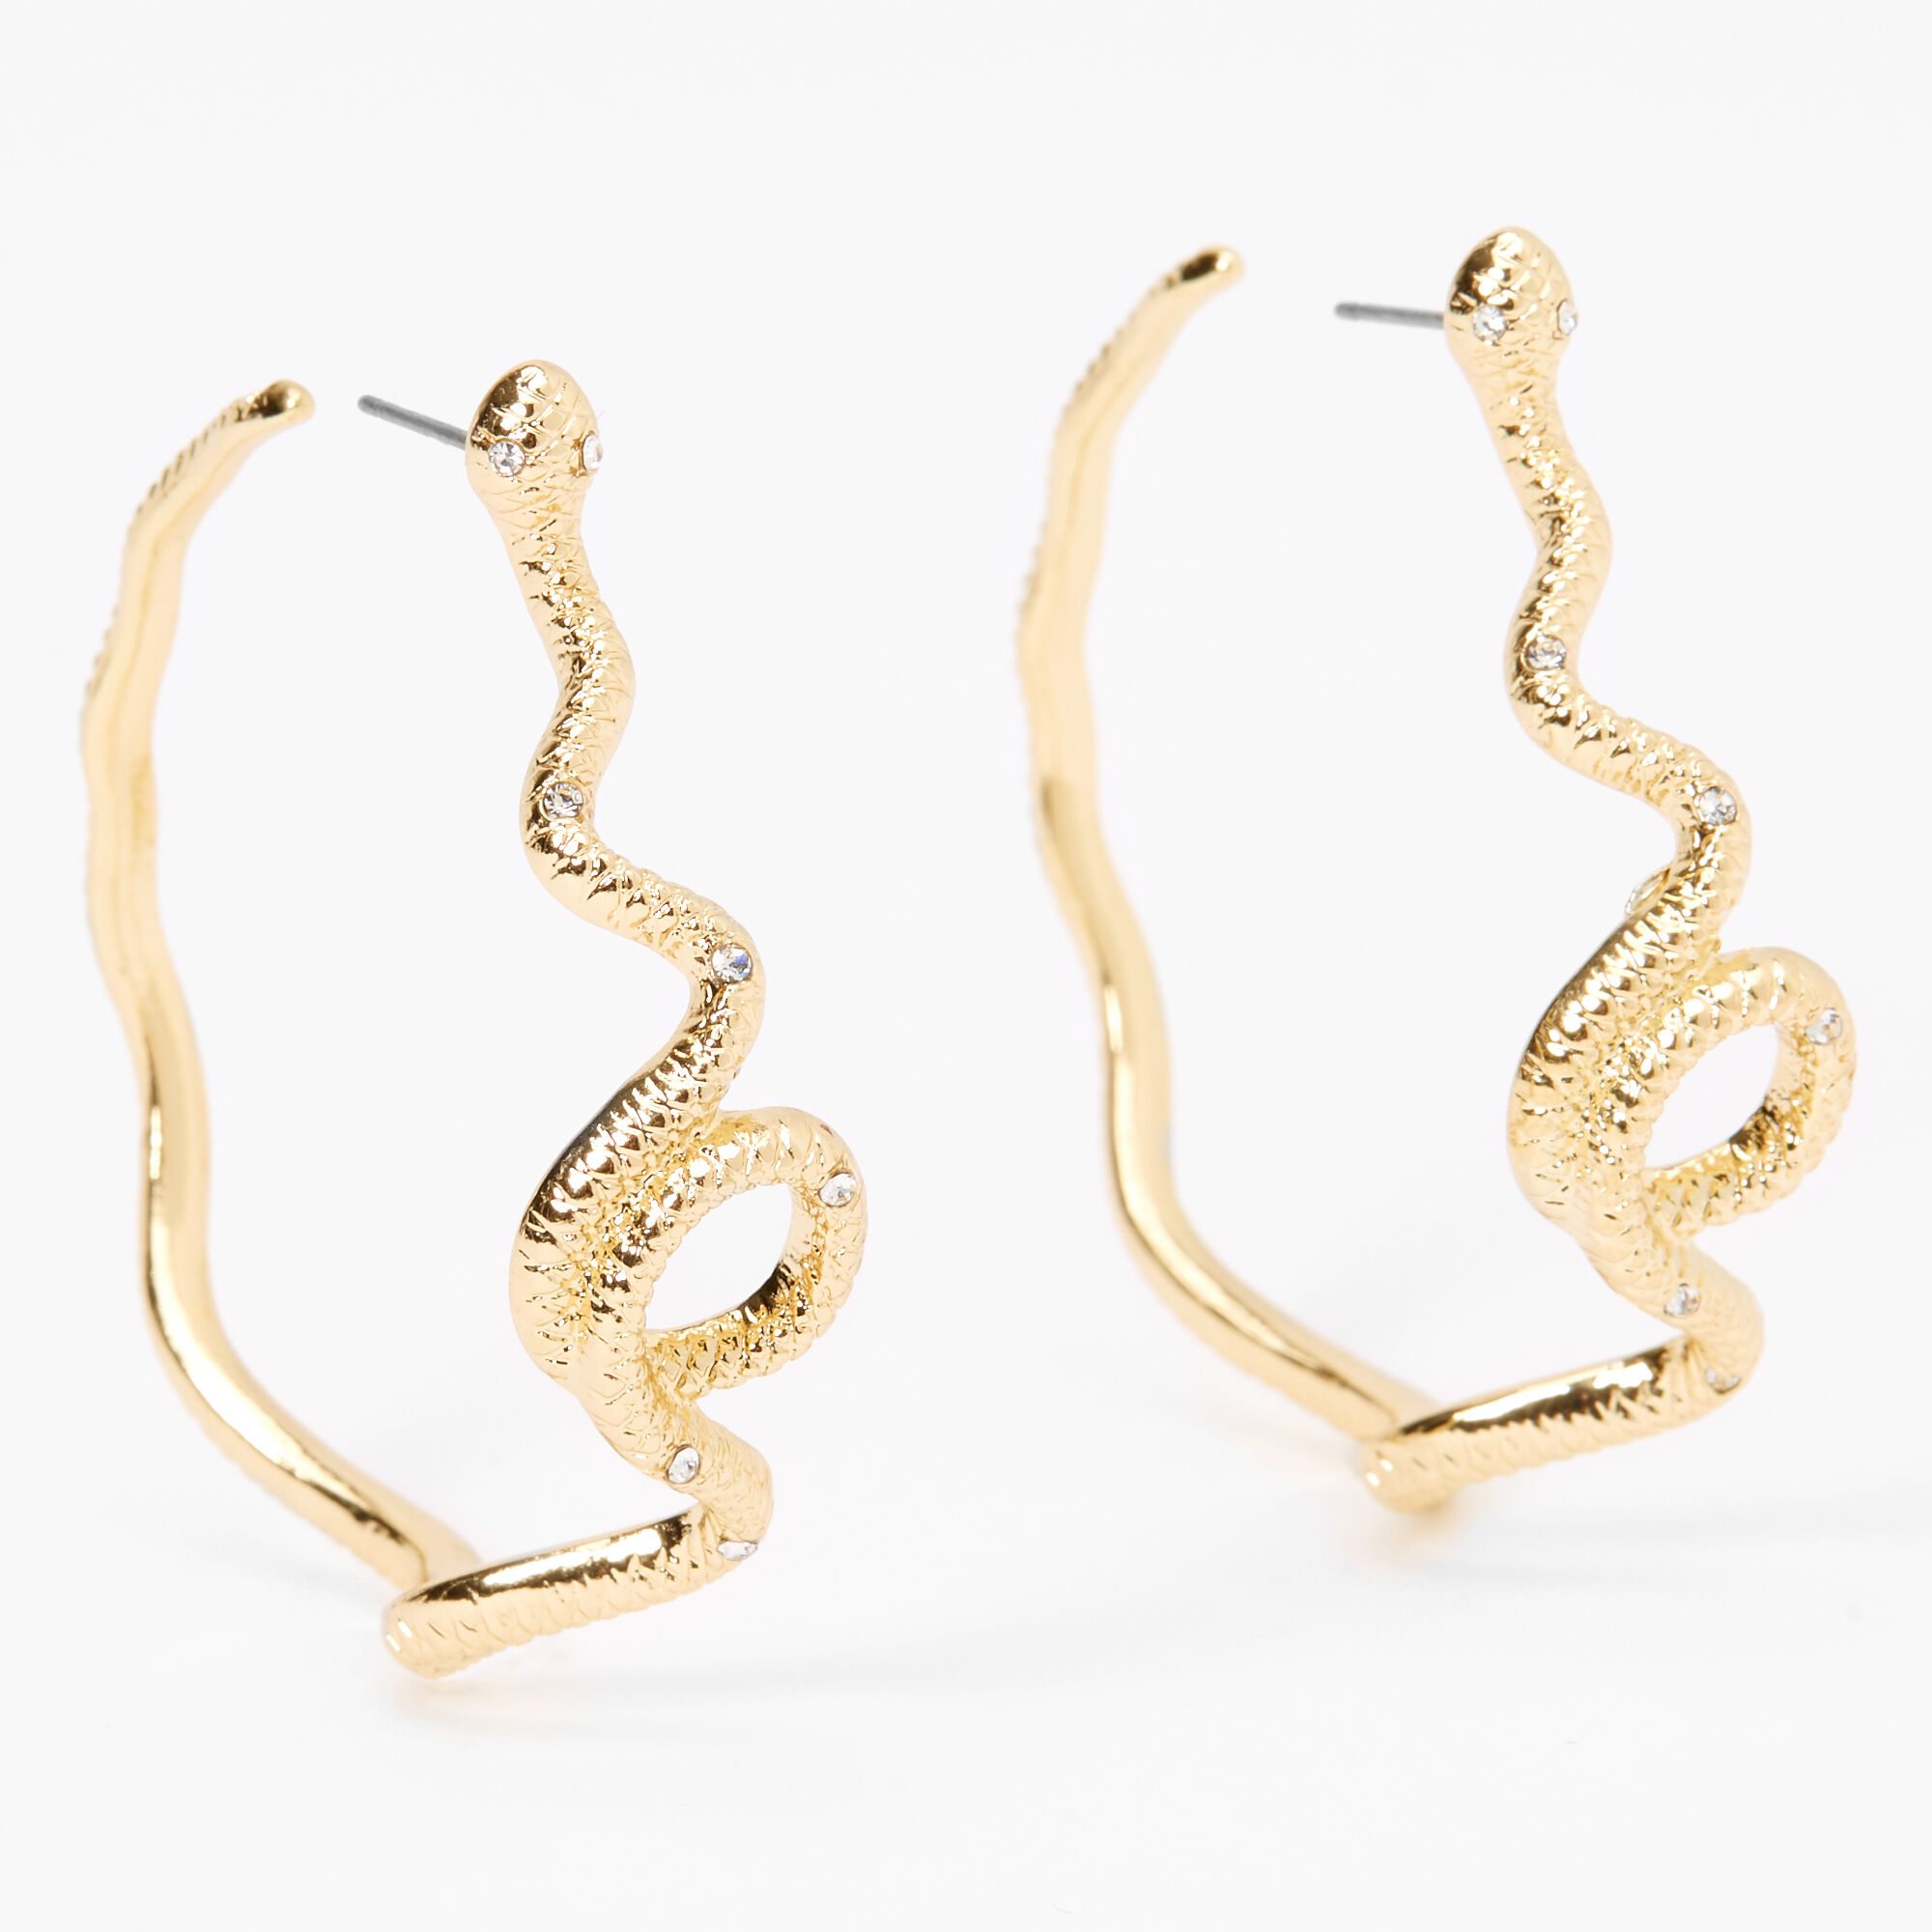 Claire's Girls Teen Gold Faux Cartilage Hoop Earrings Set, 4-Pack, Other  Stone, 38843 - Walmart.com